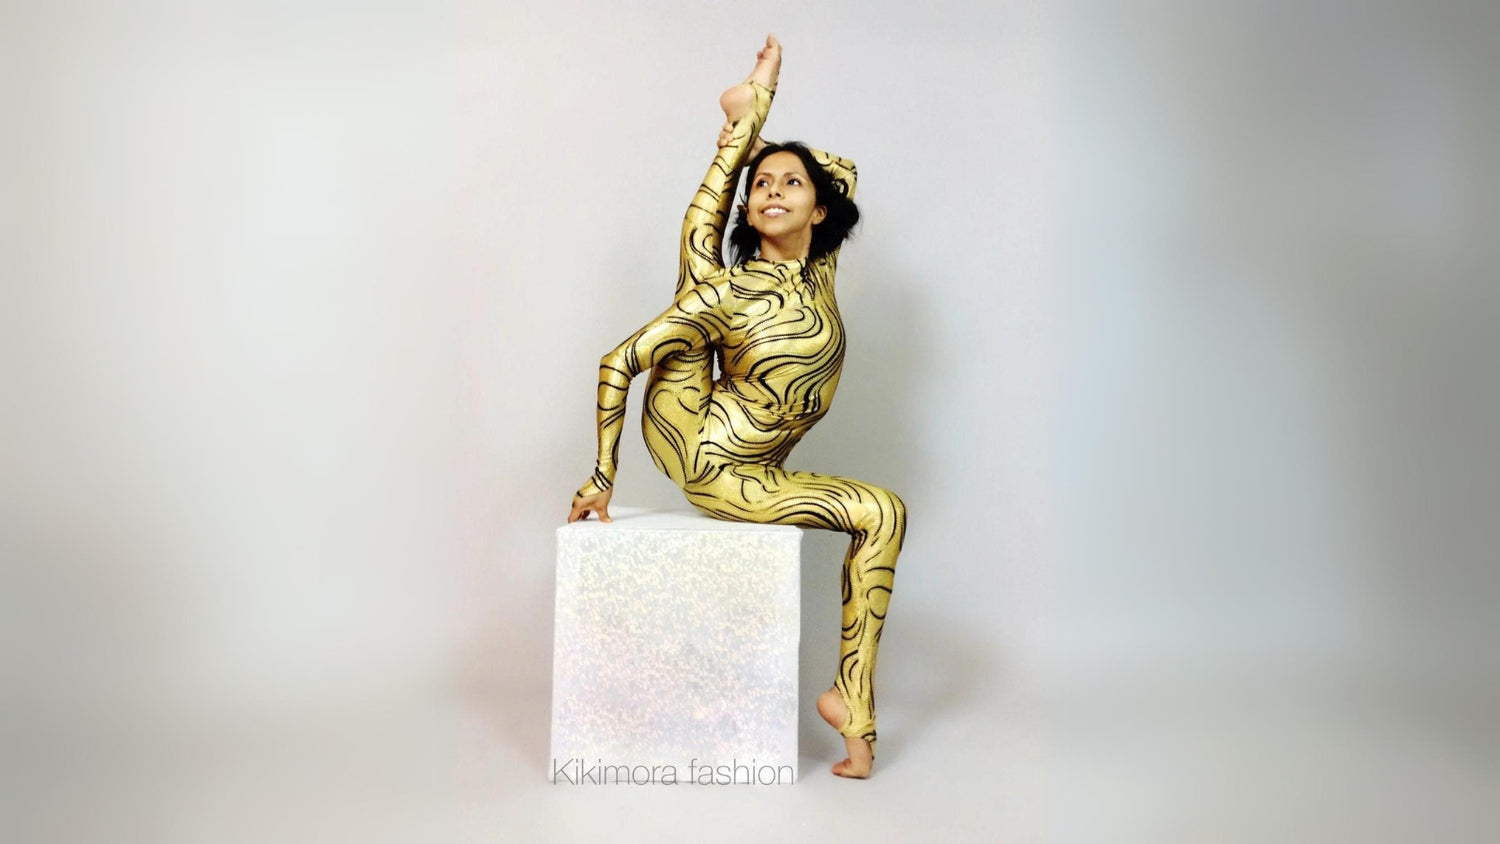 Kikimora Fashion's Top Outfit Recommendations for International Yoga Day